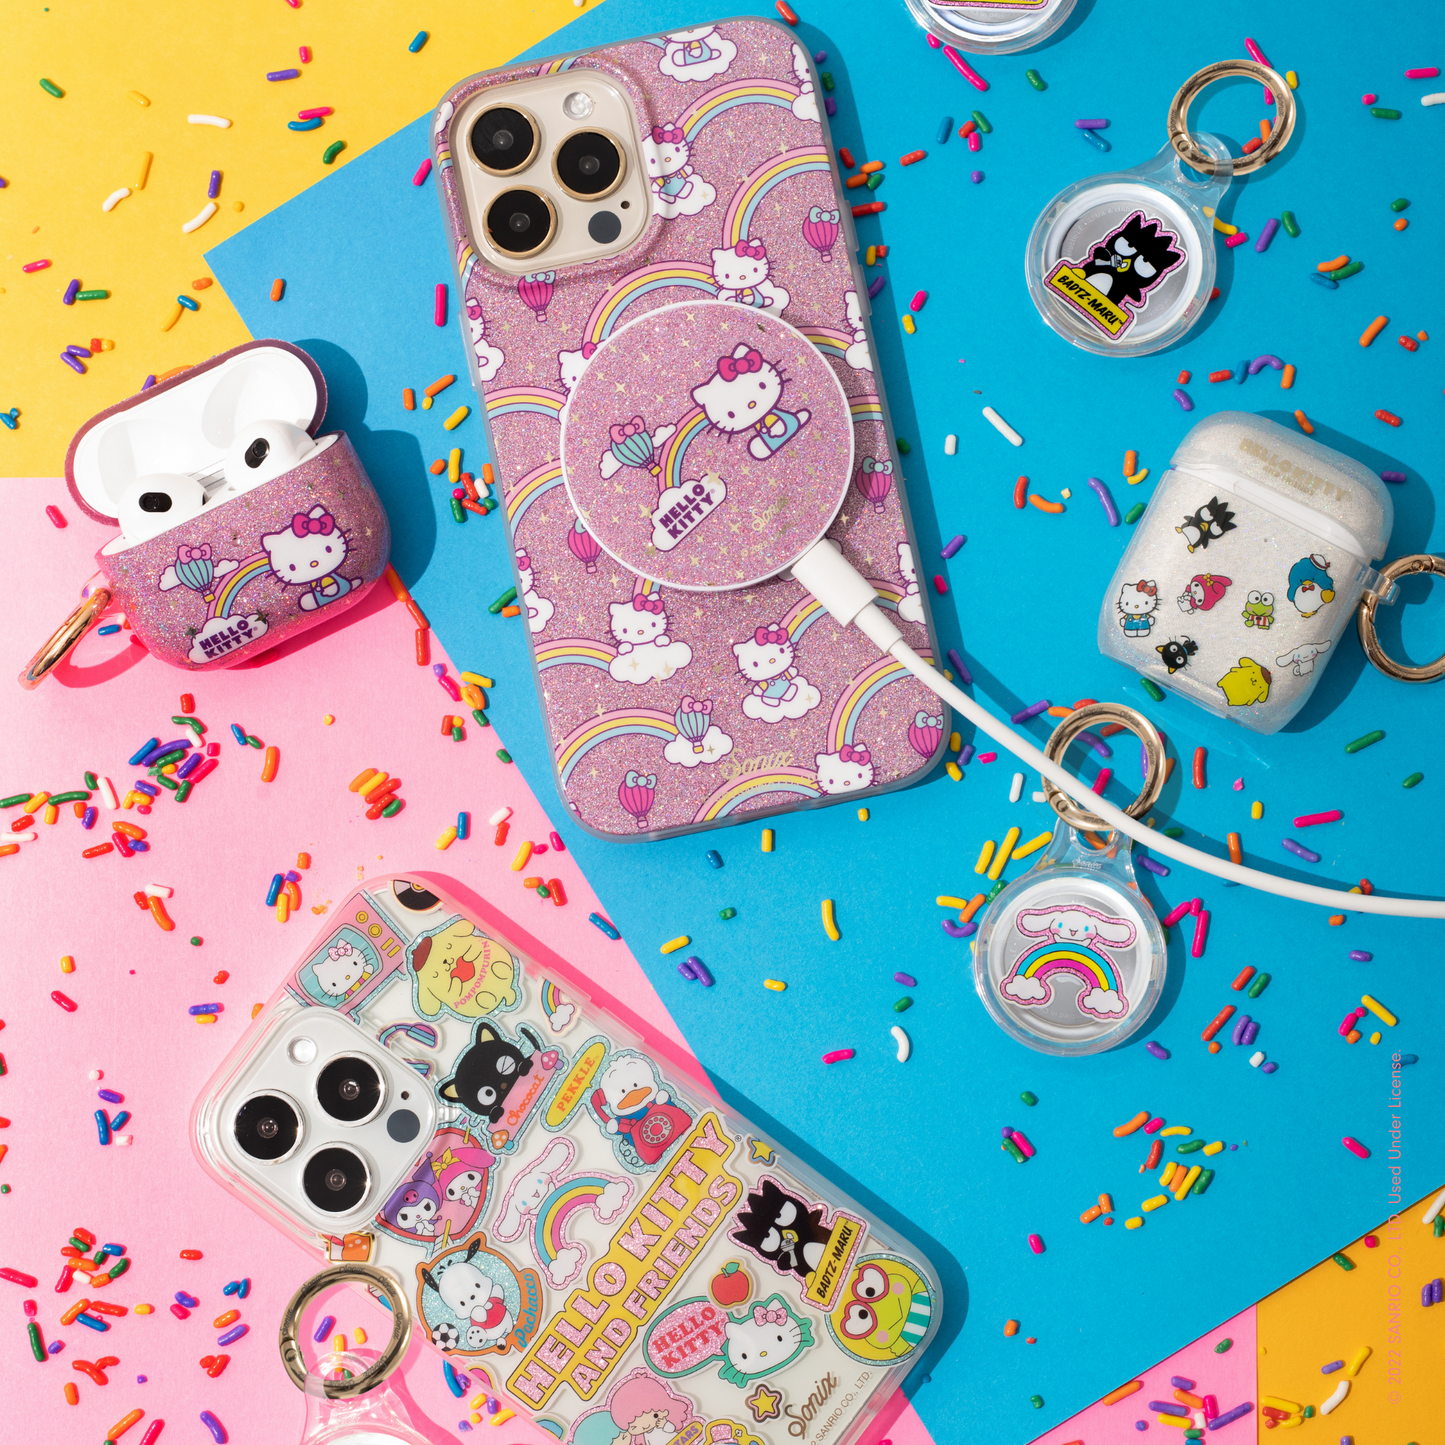 two hello kitty themed prints shown on an airpod case, iphone, and airtags